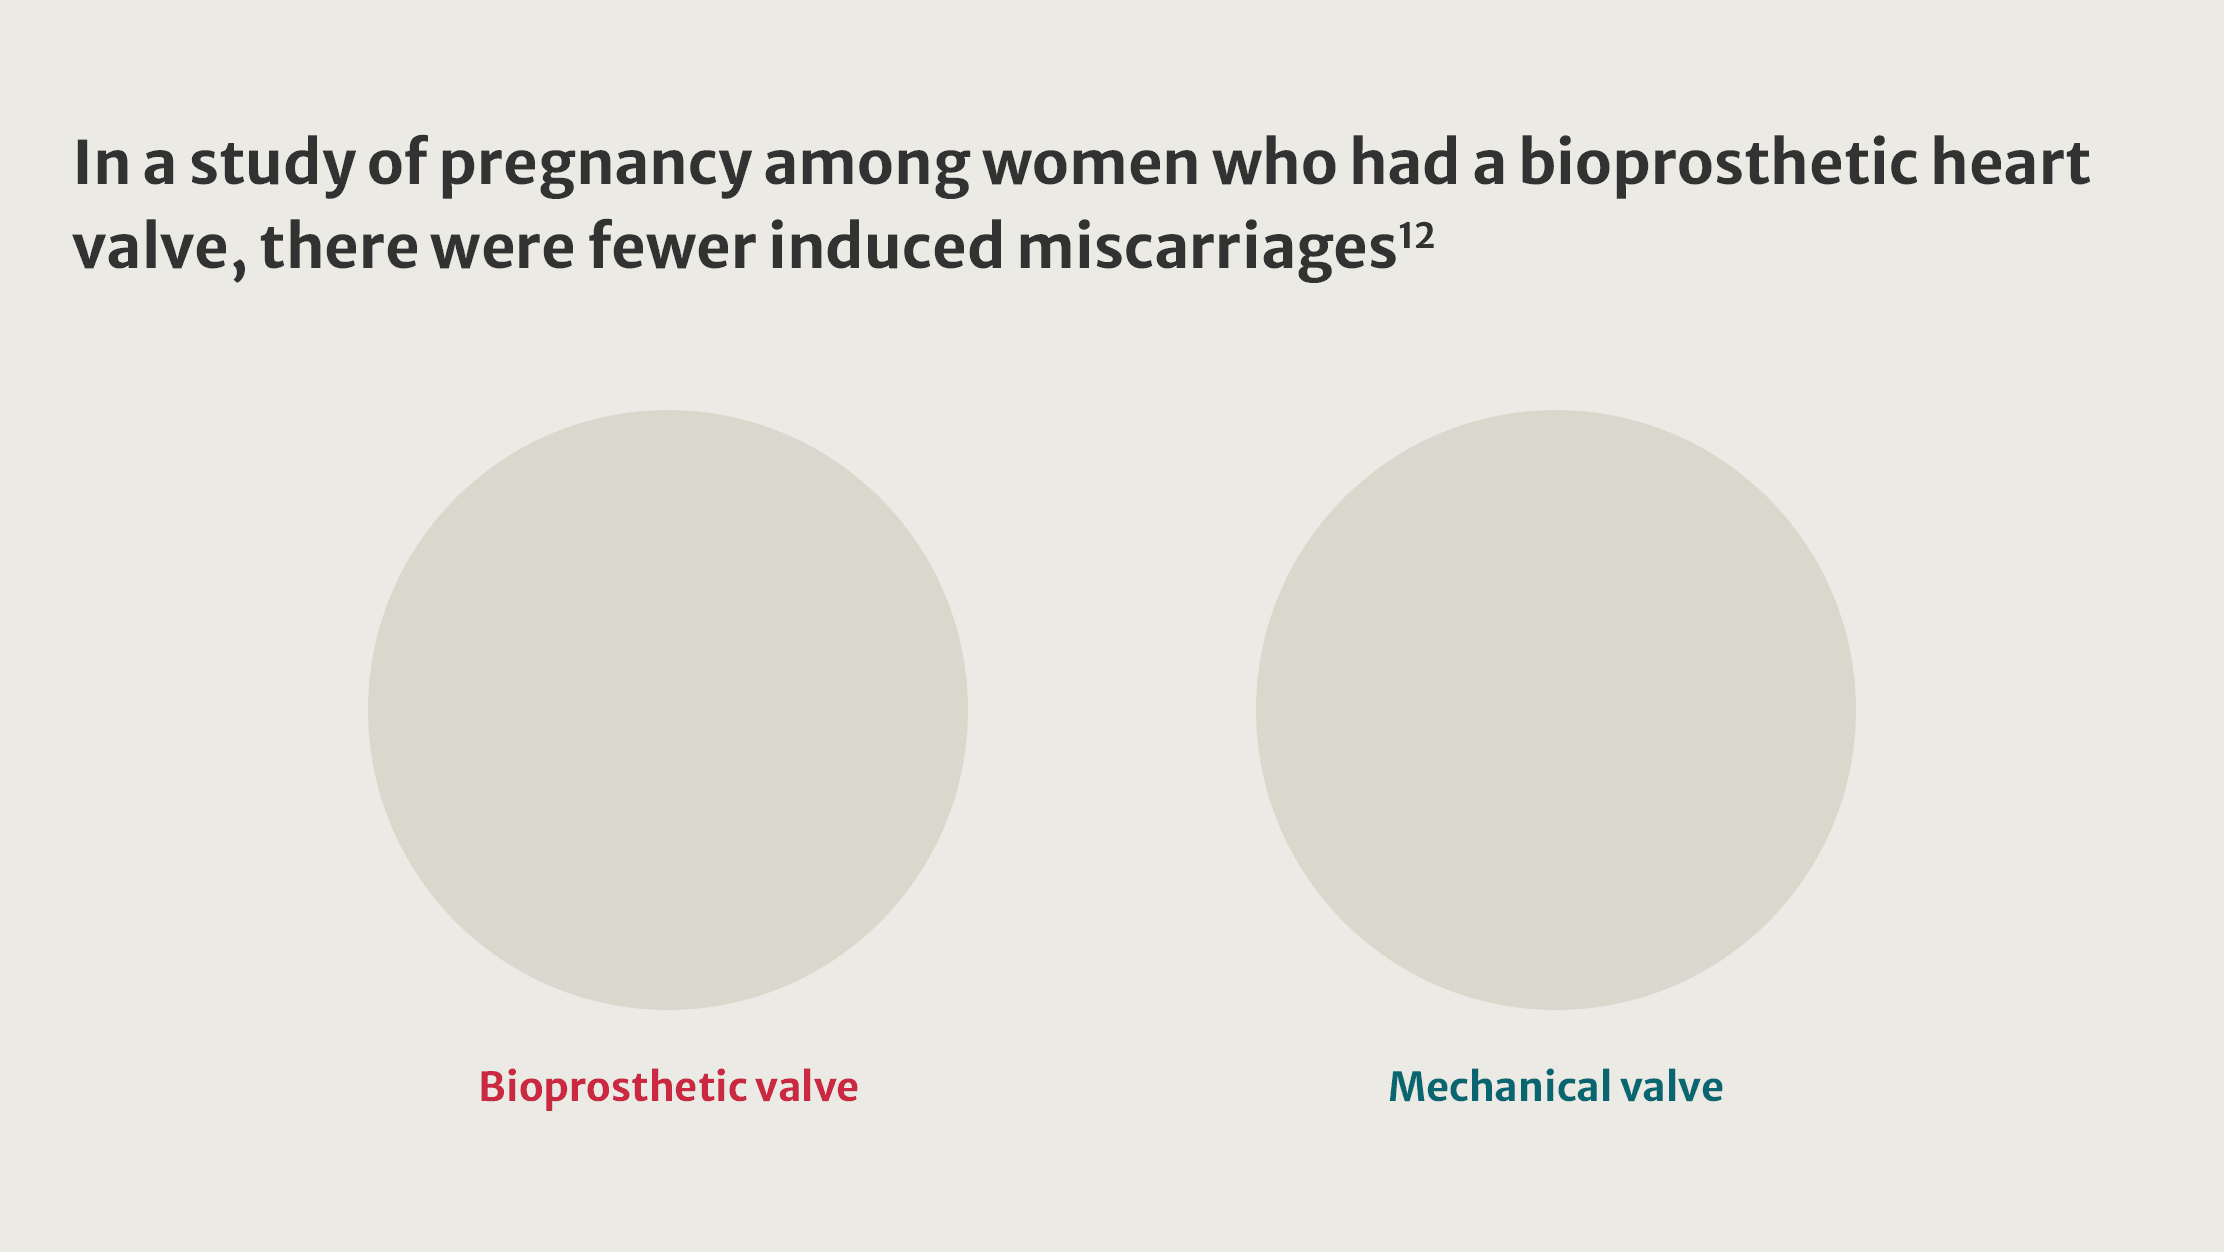 In a study of pregnancy among women who had a bioprosthetic heart valve, there were fewer induced miscarriages.